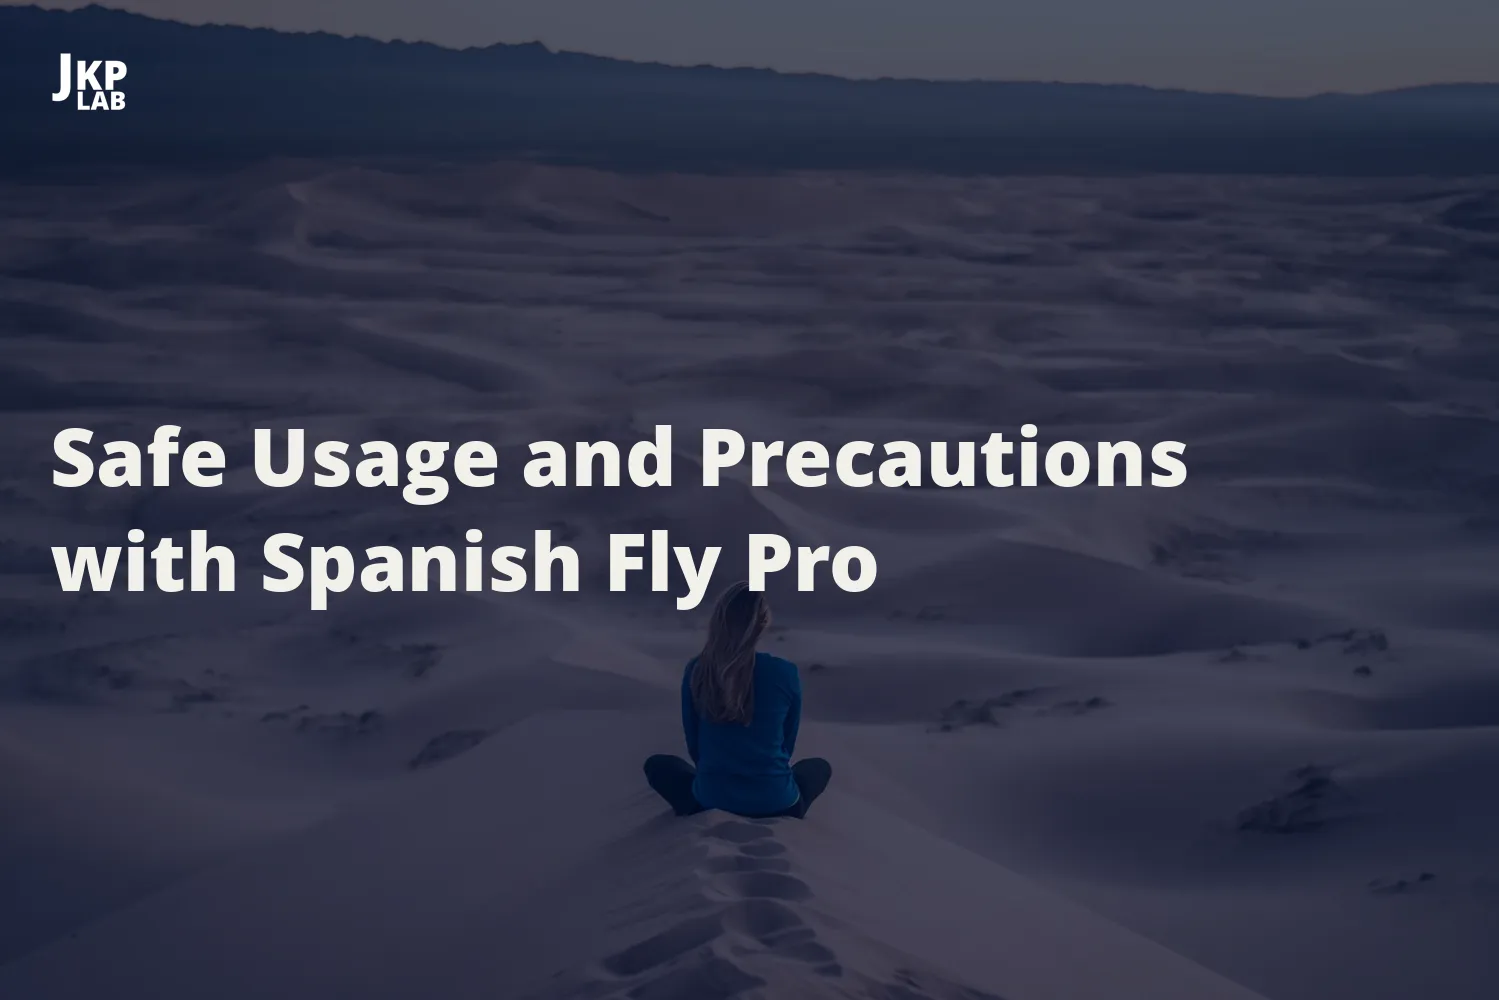 Safety and Precautions when Using Spanish Fly